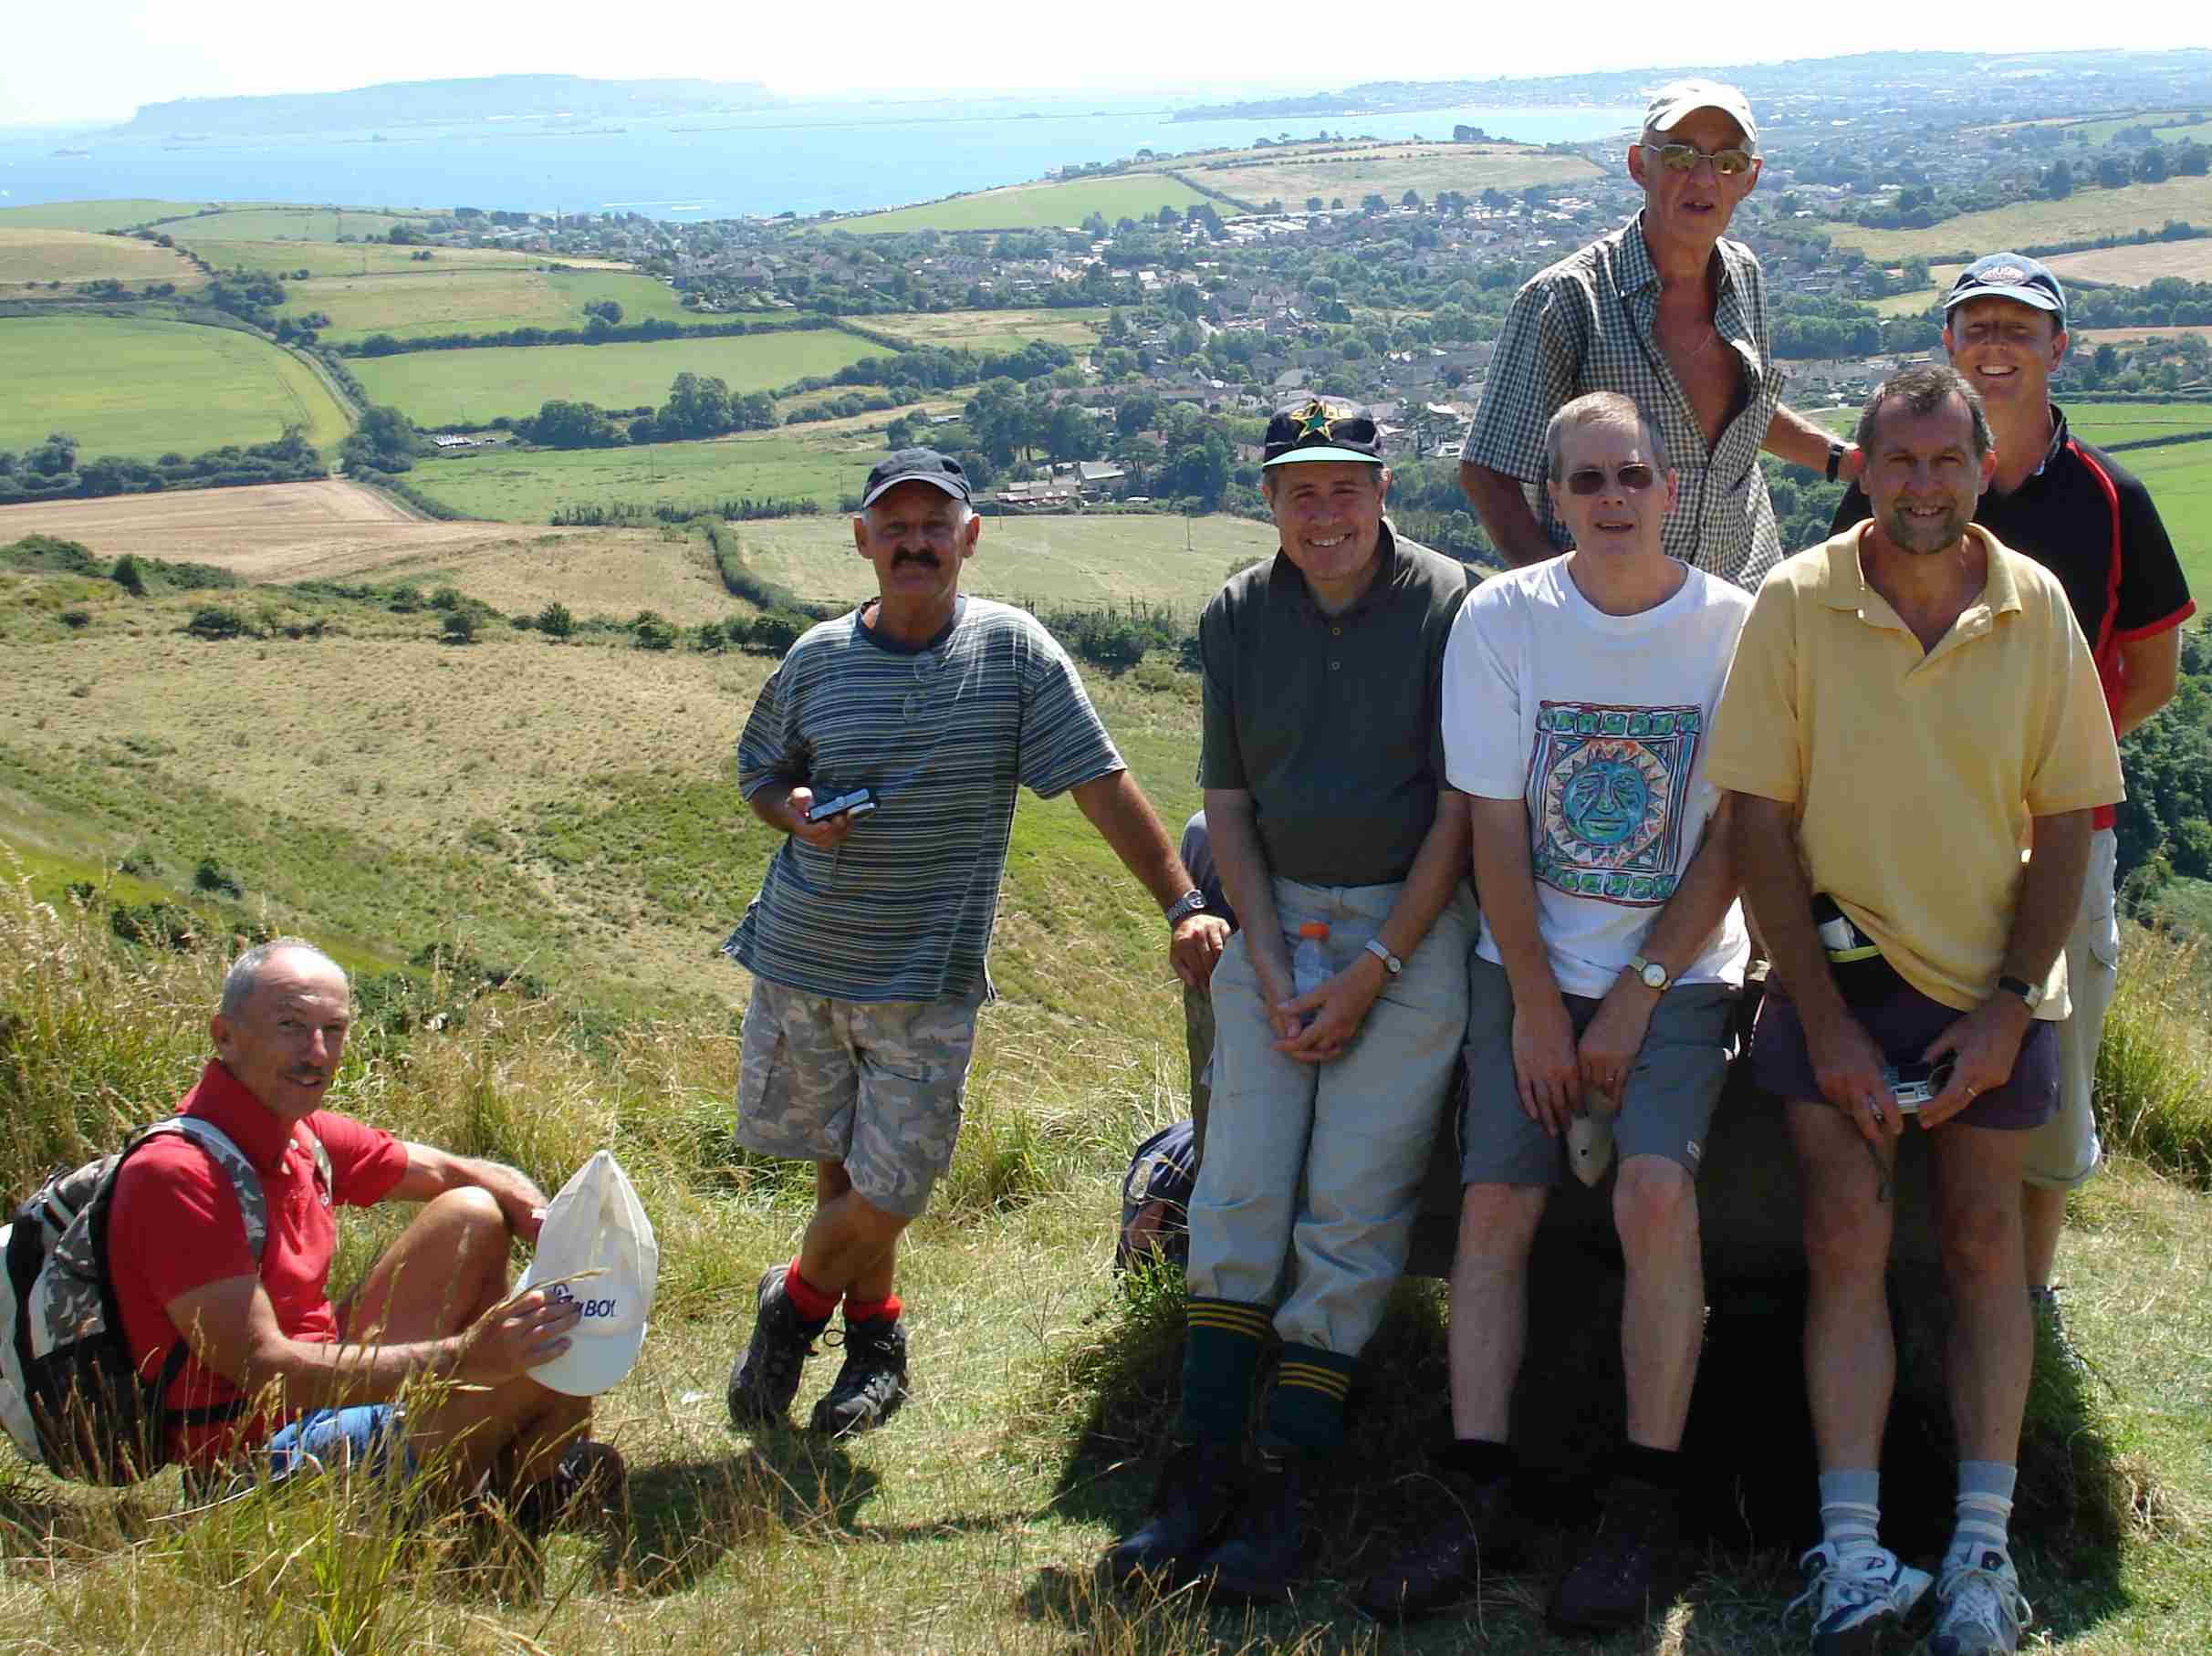 My friends from the Dorset GOC walking group